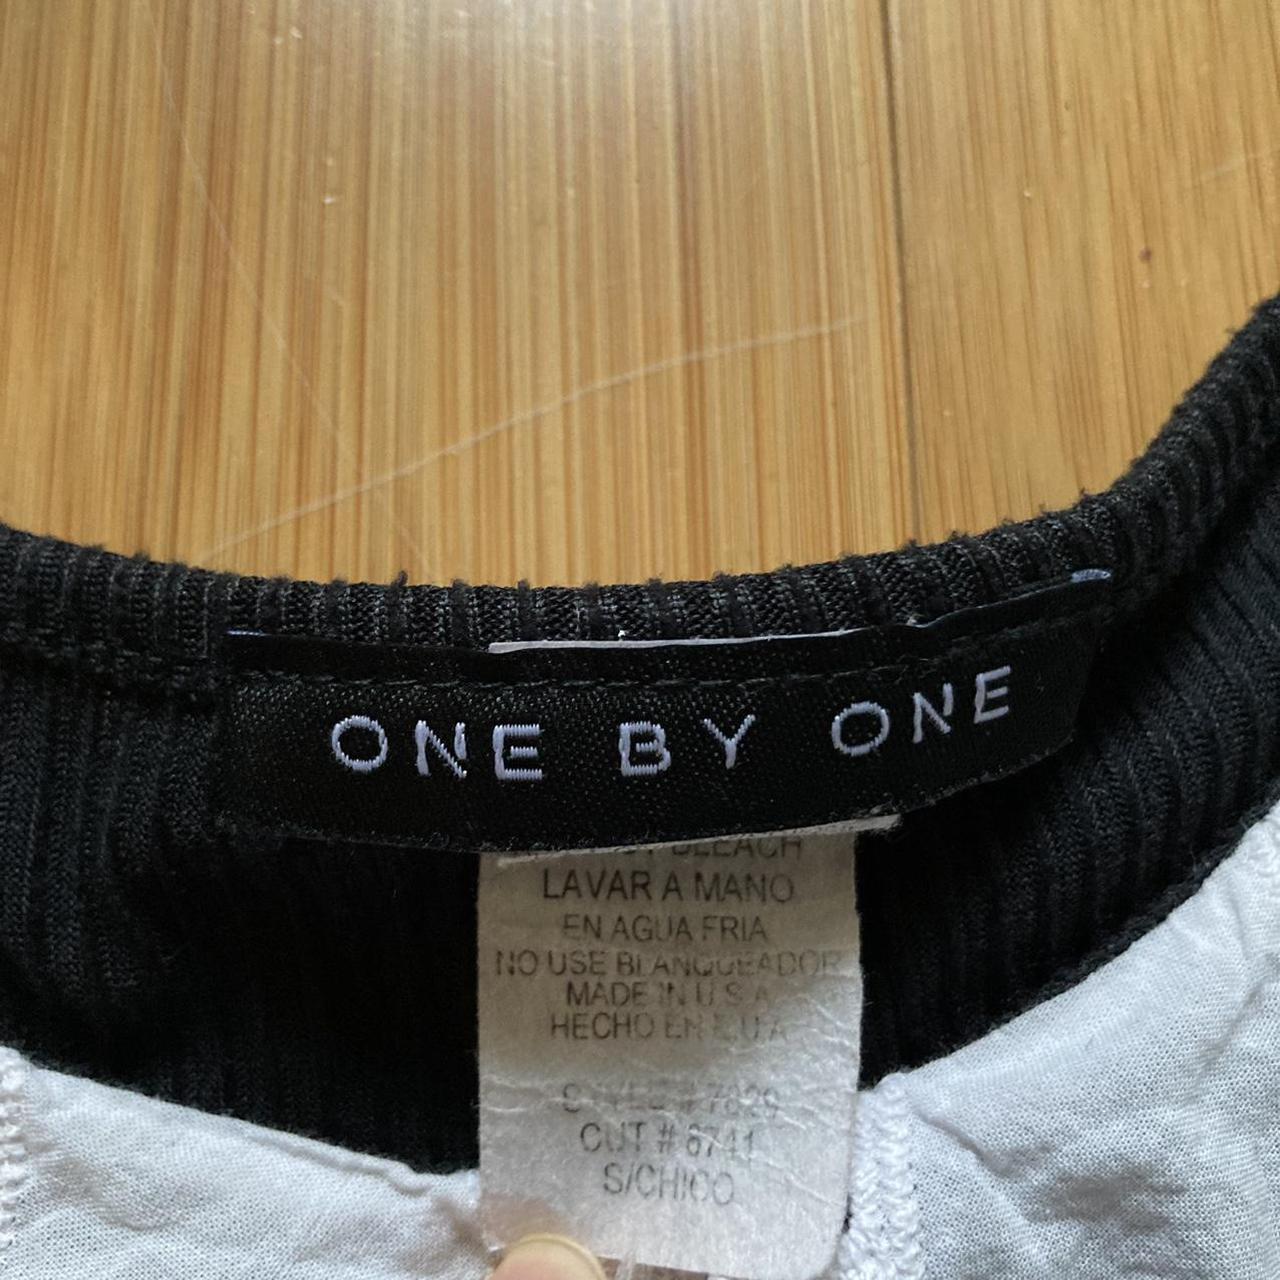 Product Image 3 - Brand One By One .